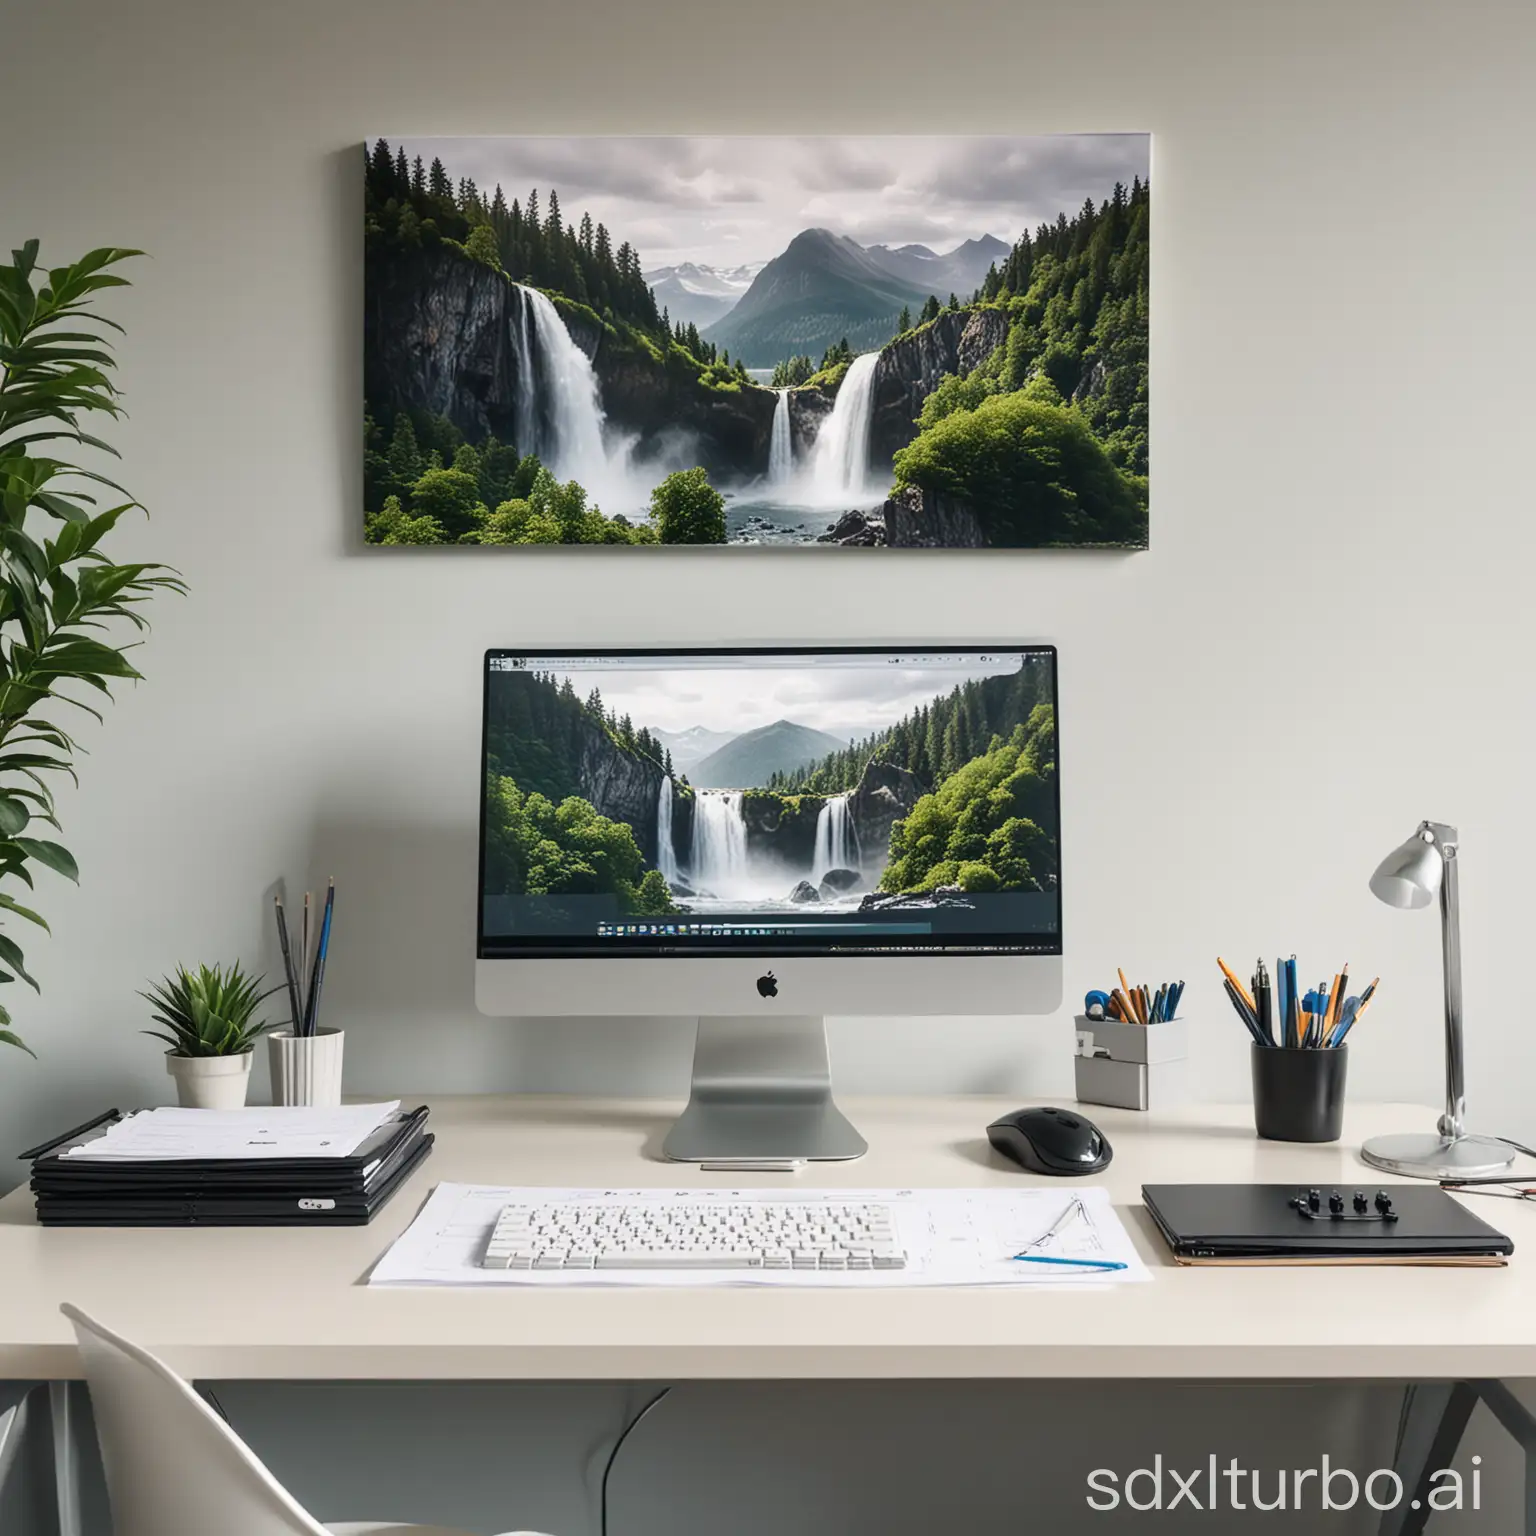 A clean, well-organized desk as an office workspace with computer, monitor, mouse and keyboard along with a calculator and paper task list. The office is bright and modernly furnished. No people visible in the image. On the wall, a photograph of a landscape with waterfall.